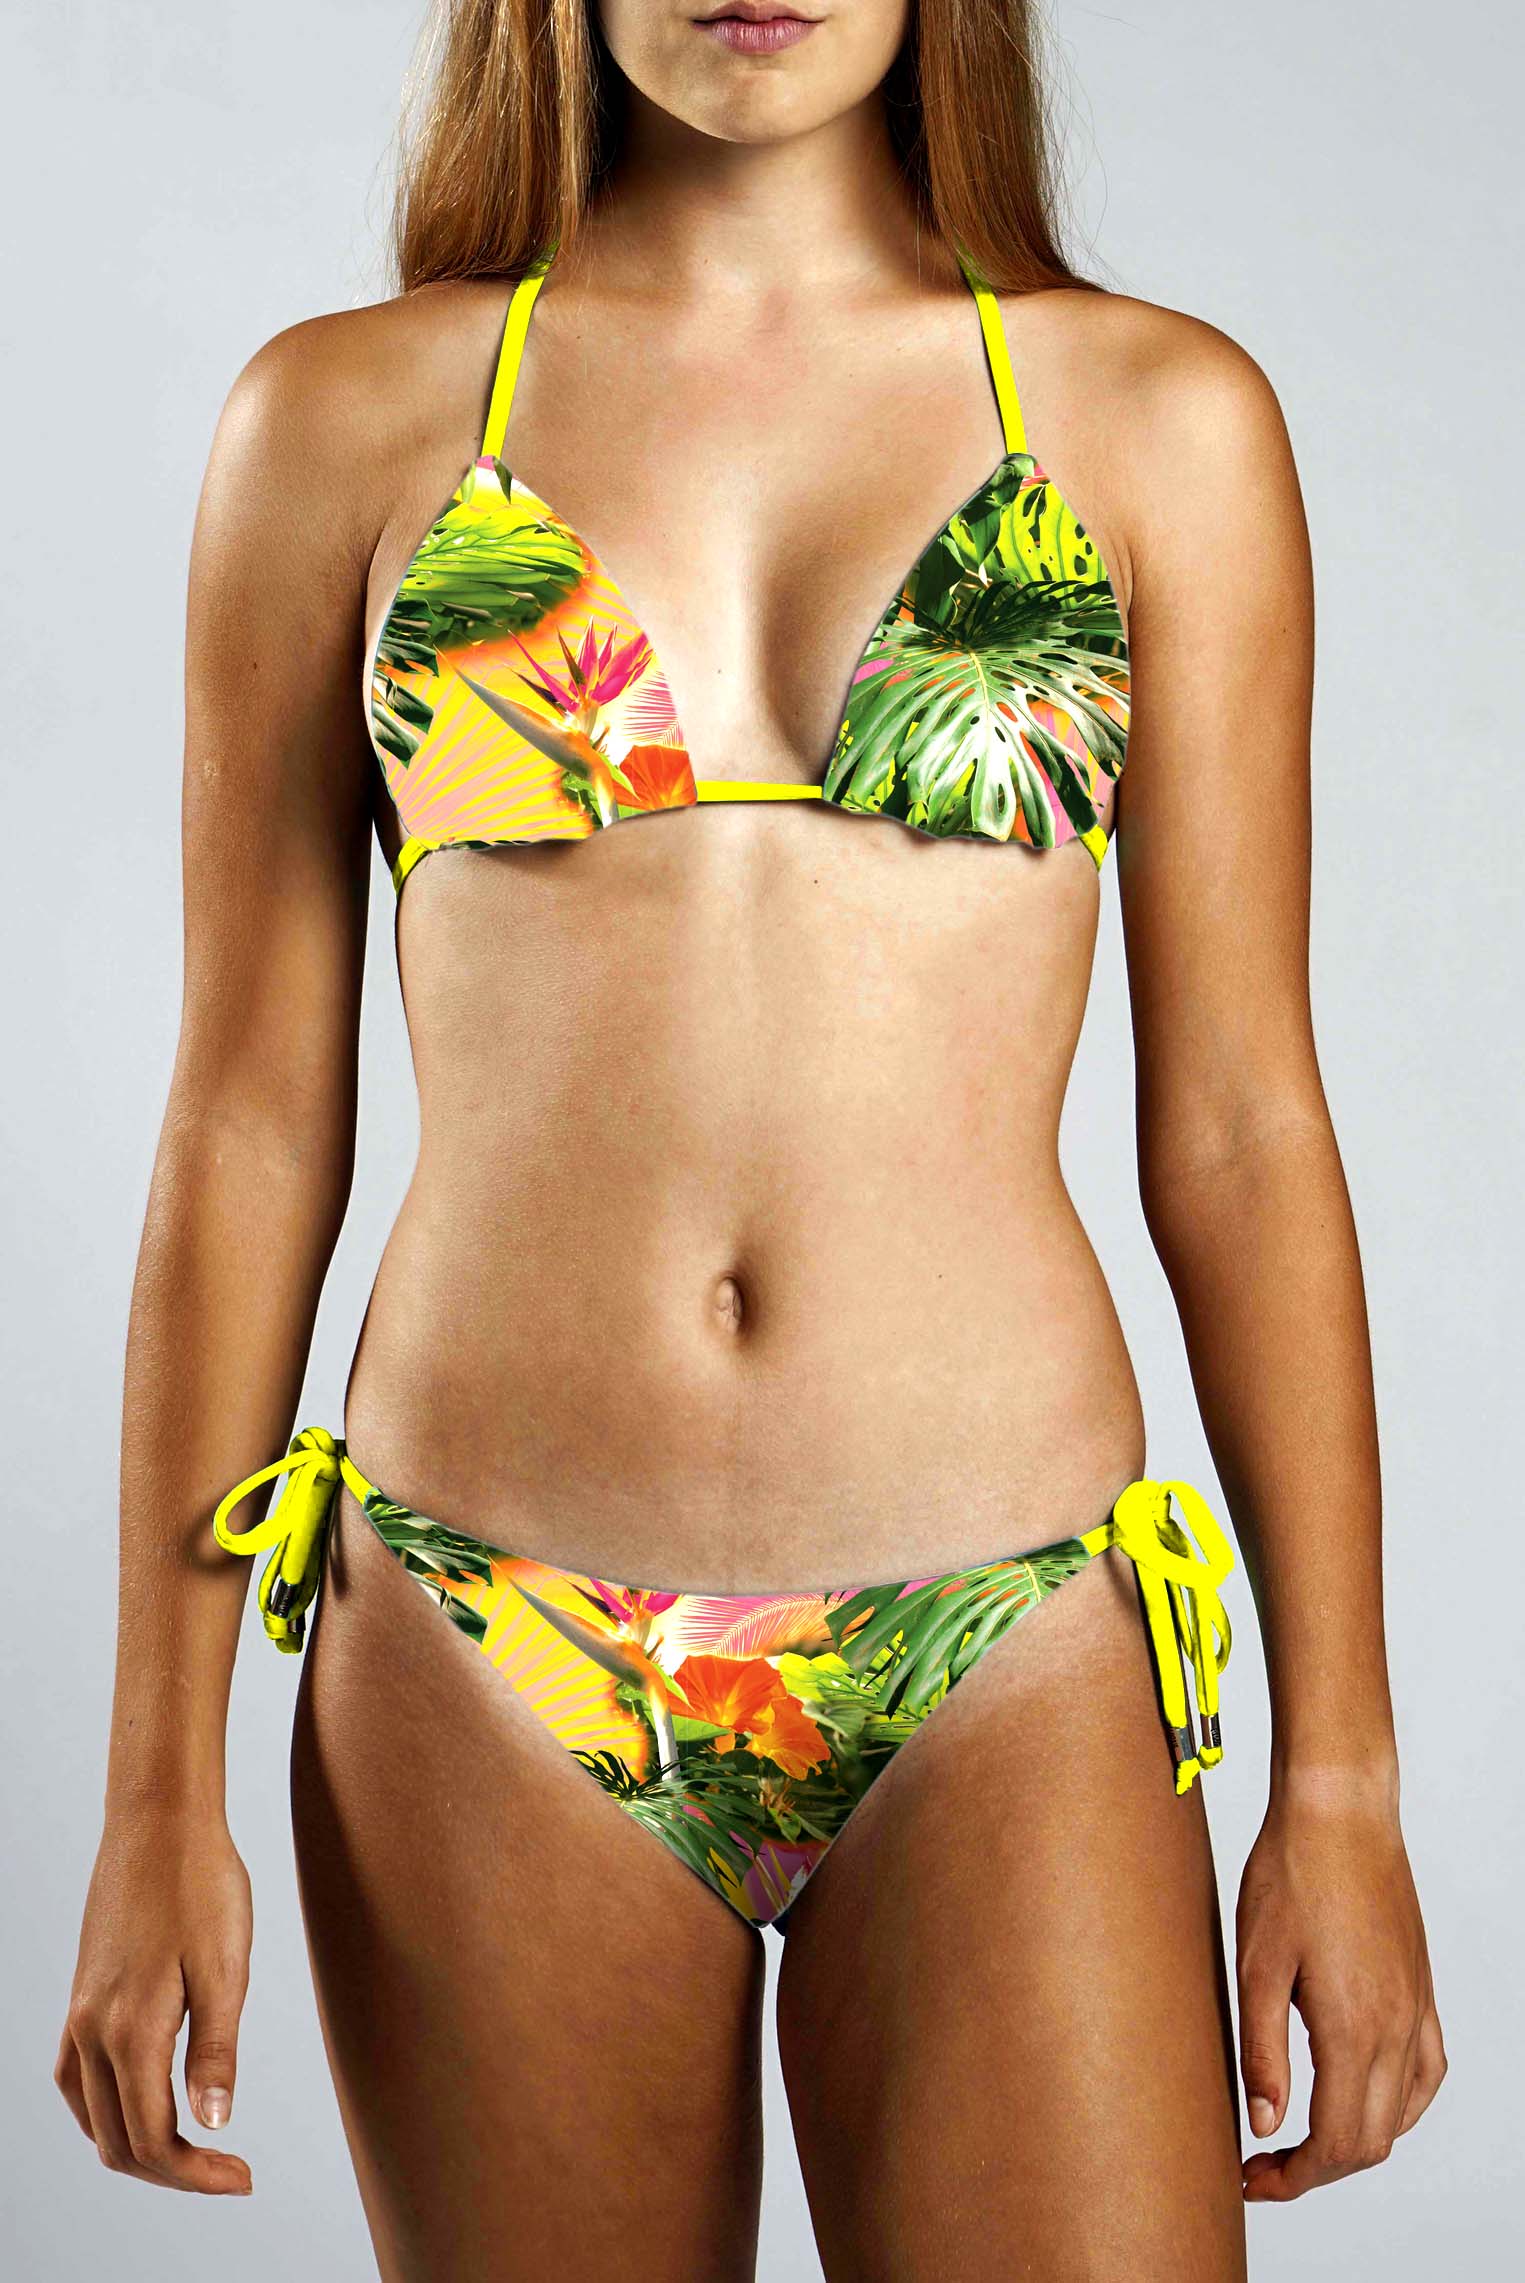 Out from Under Women's Orange Colorful Tropical Print Bikini